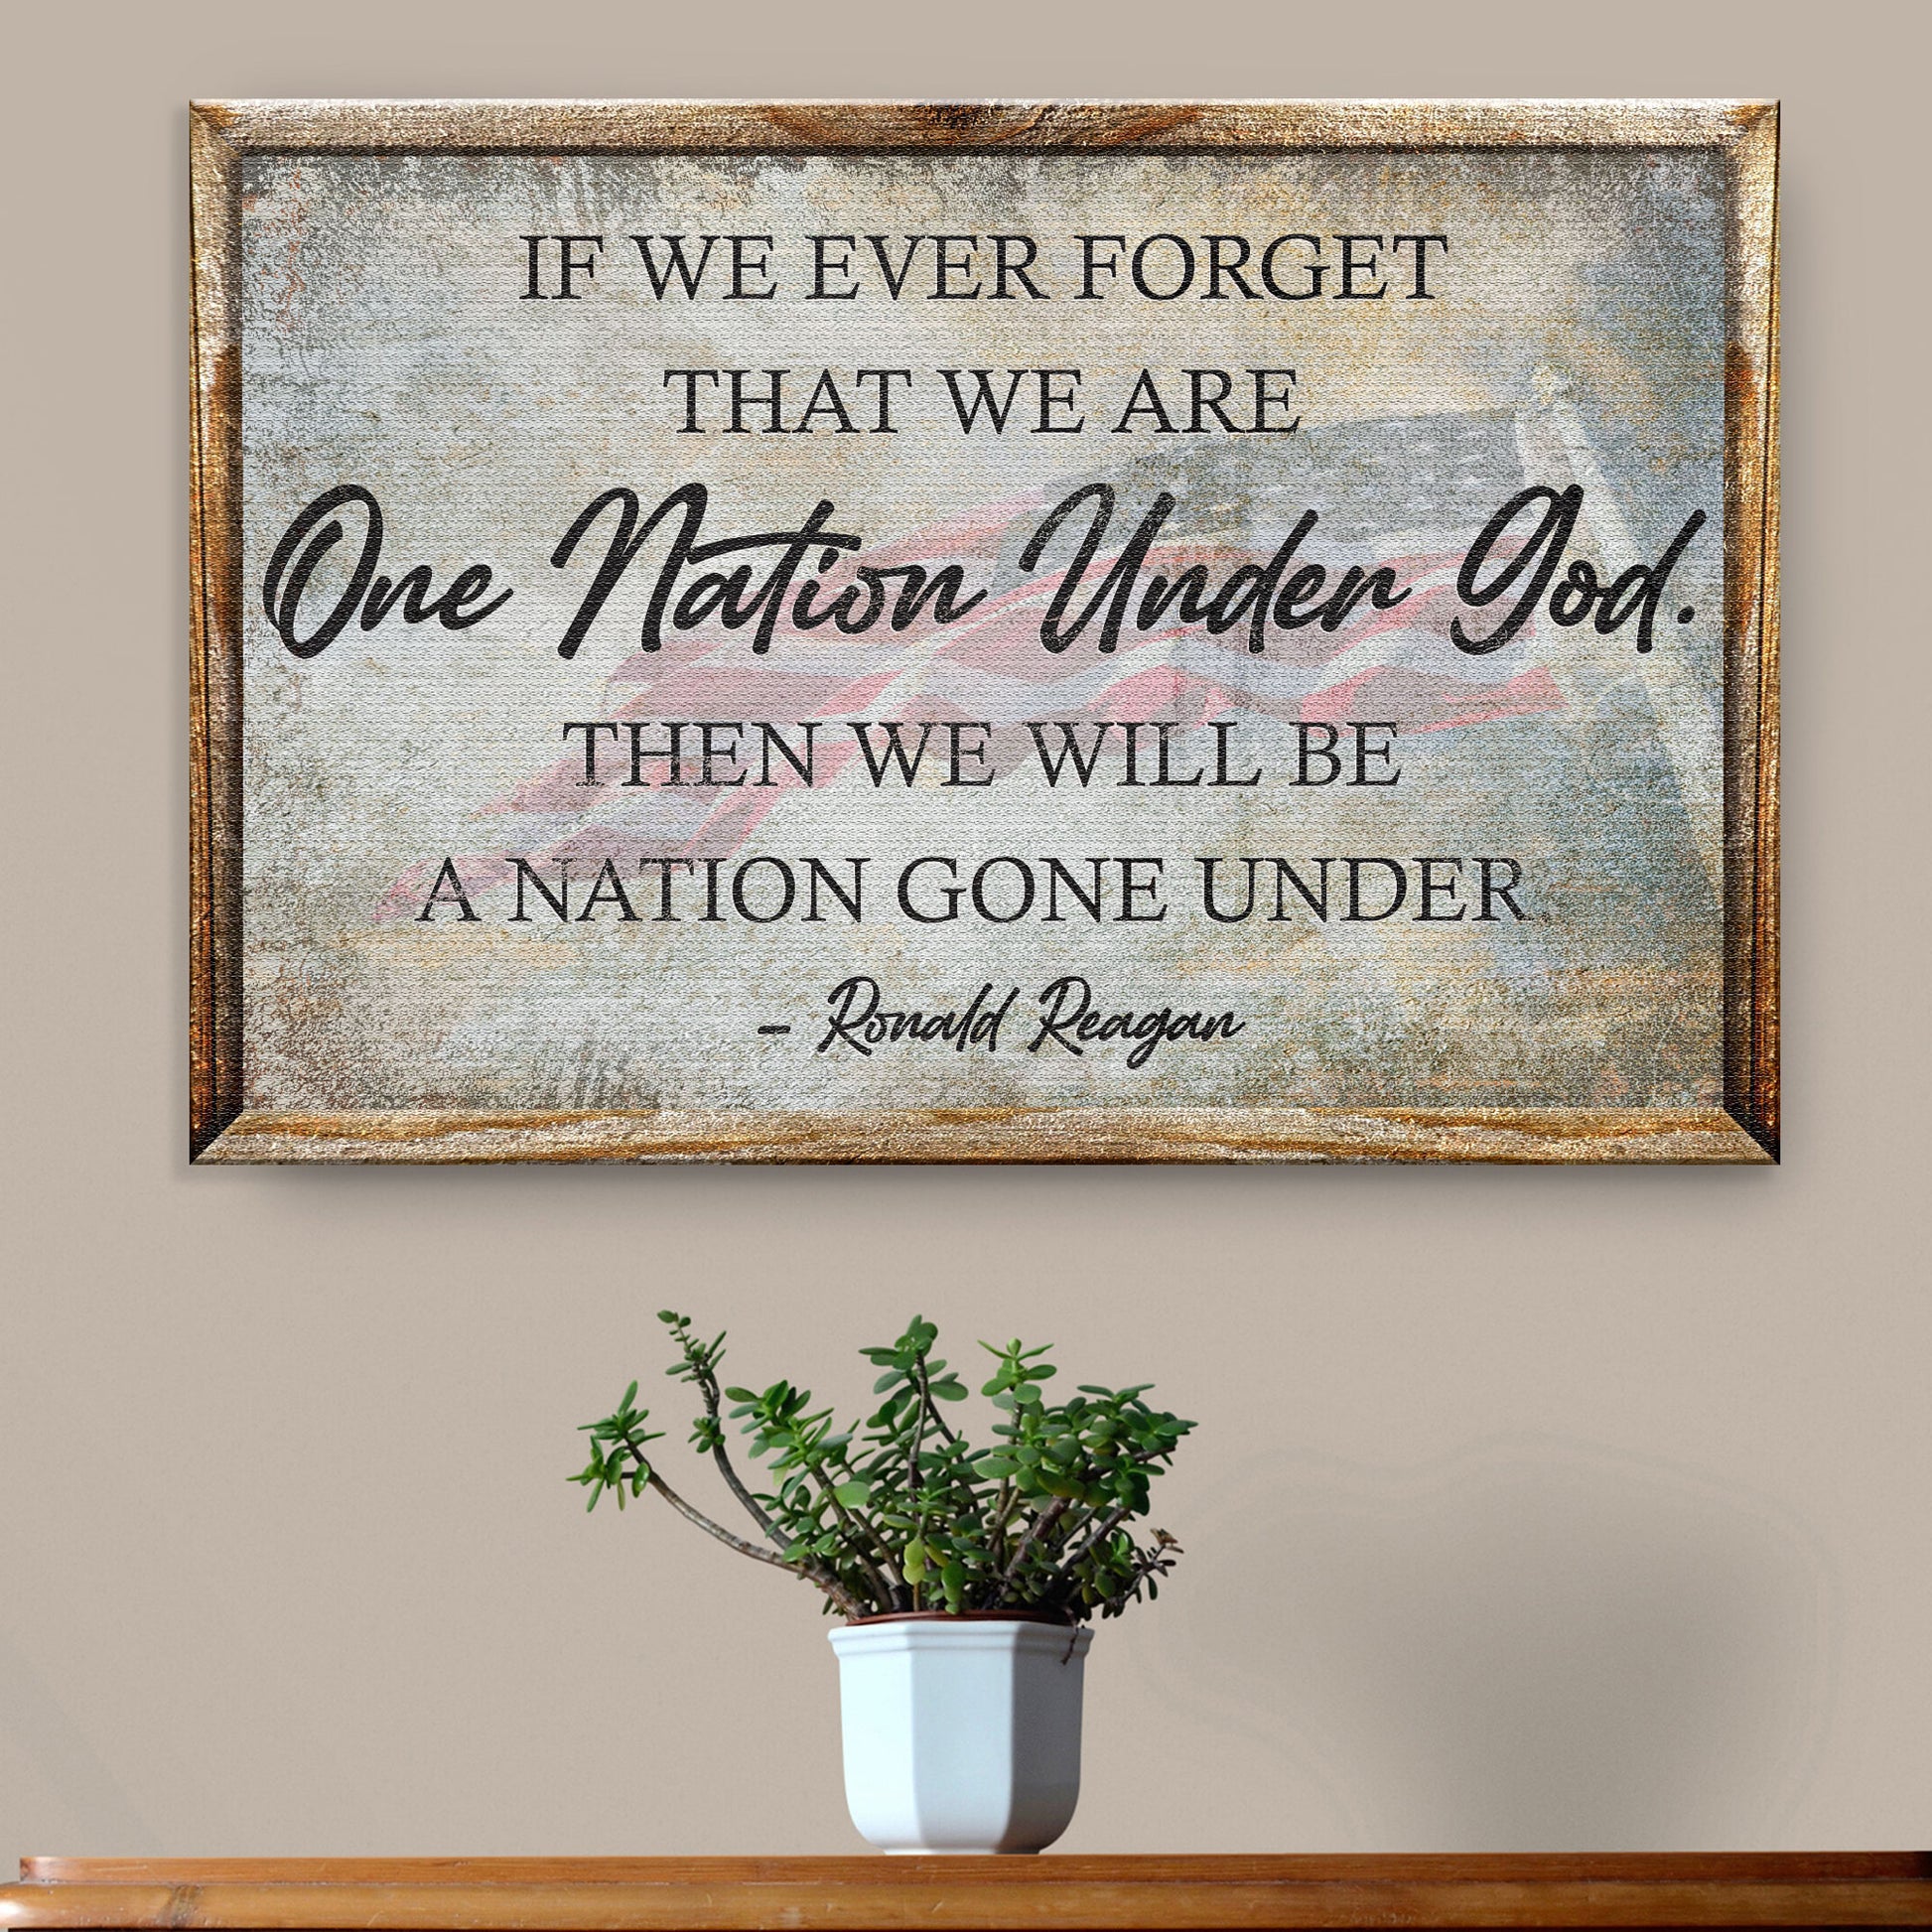 One Nation Under God Ronald Reagan Sign III Style 2 - Image by Tailored Canvases